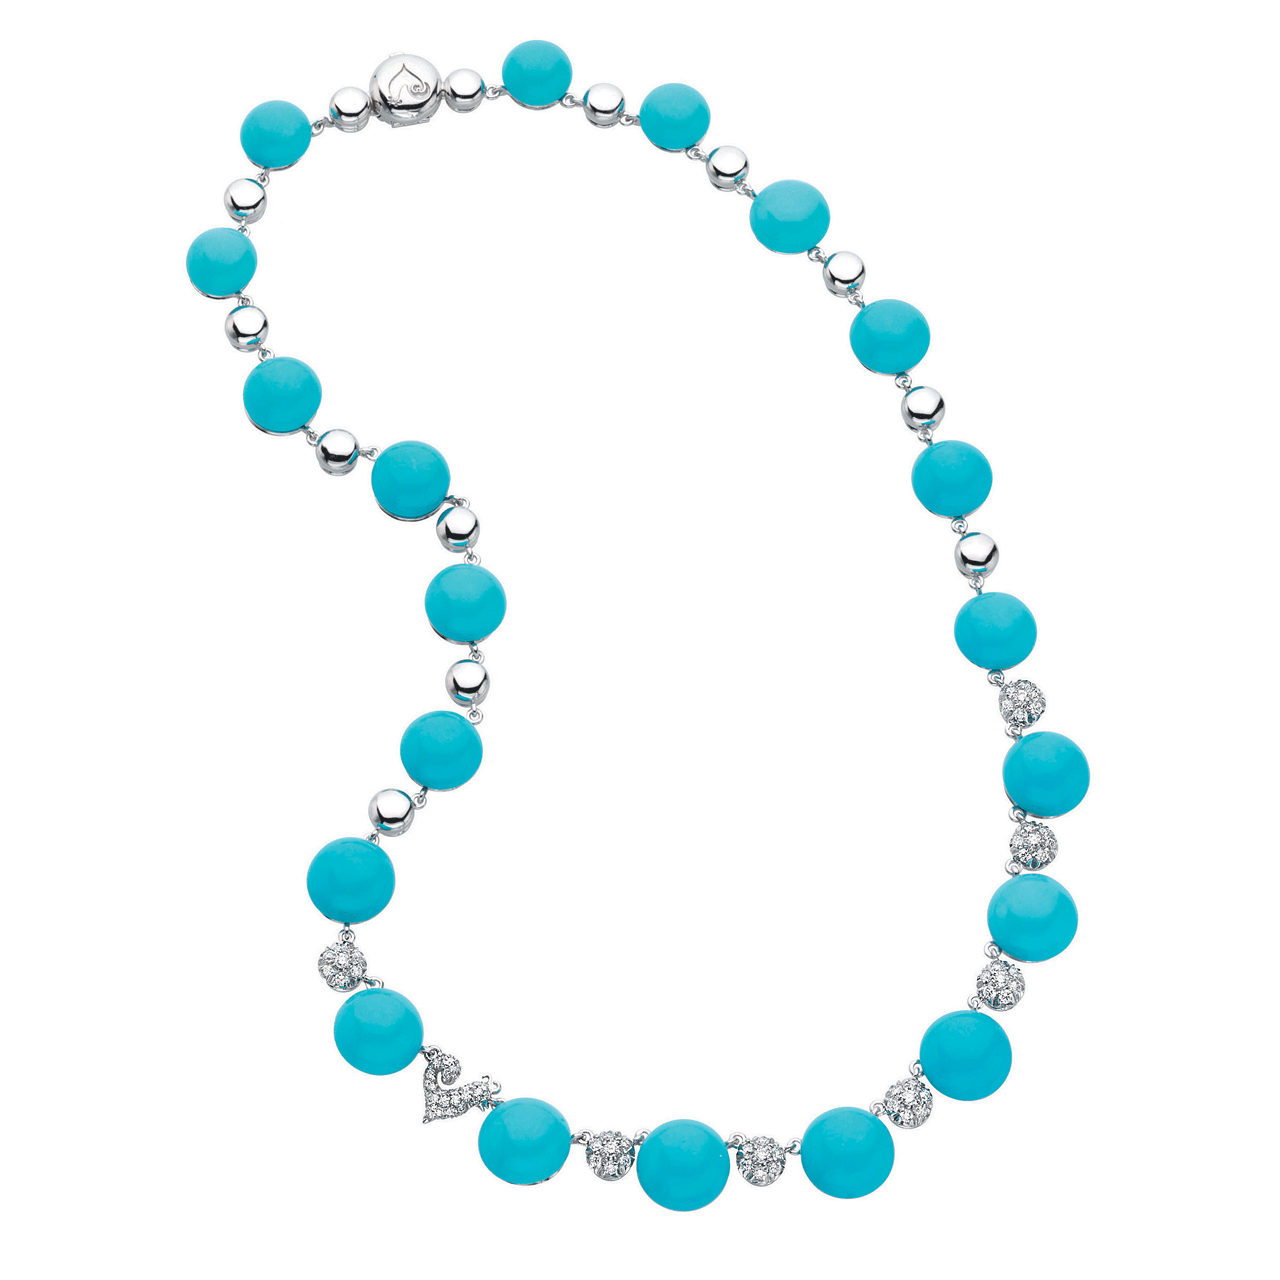 Chantecler Turquois Necklace, Exclusively At Hamilton Jewelers